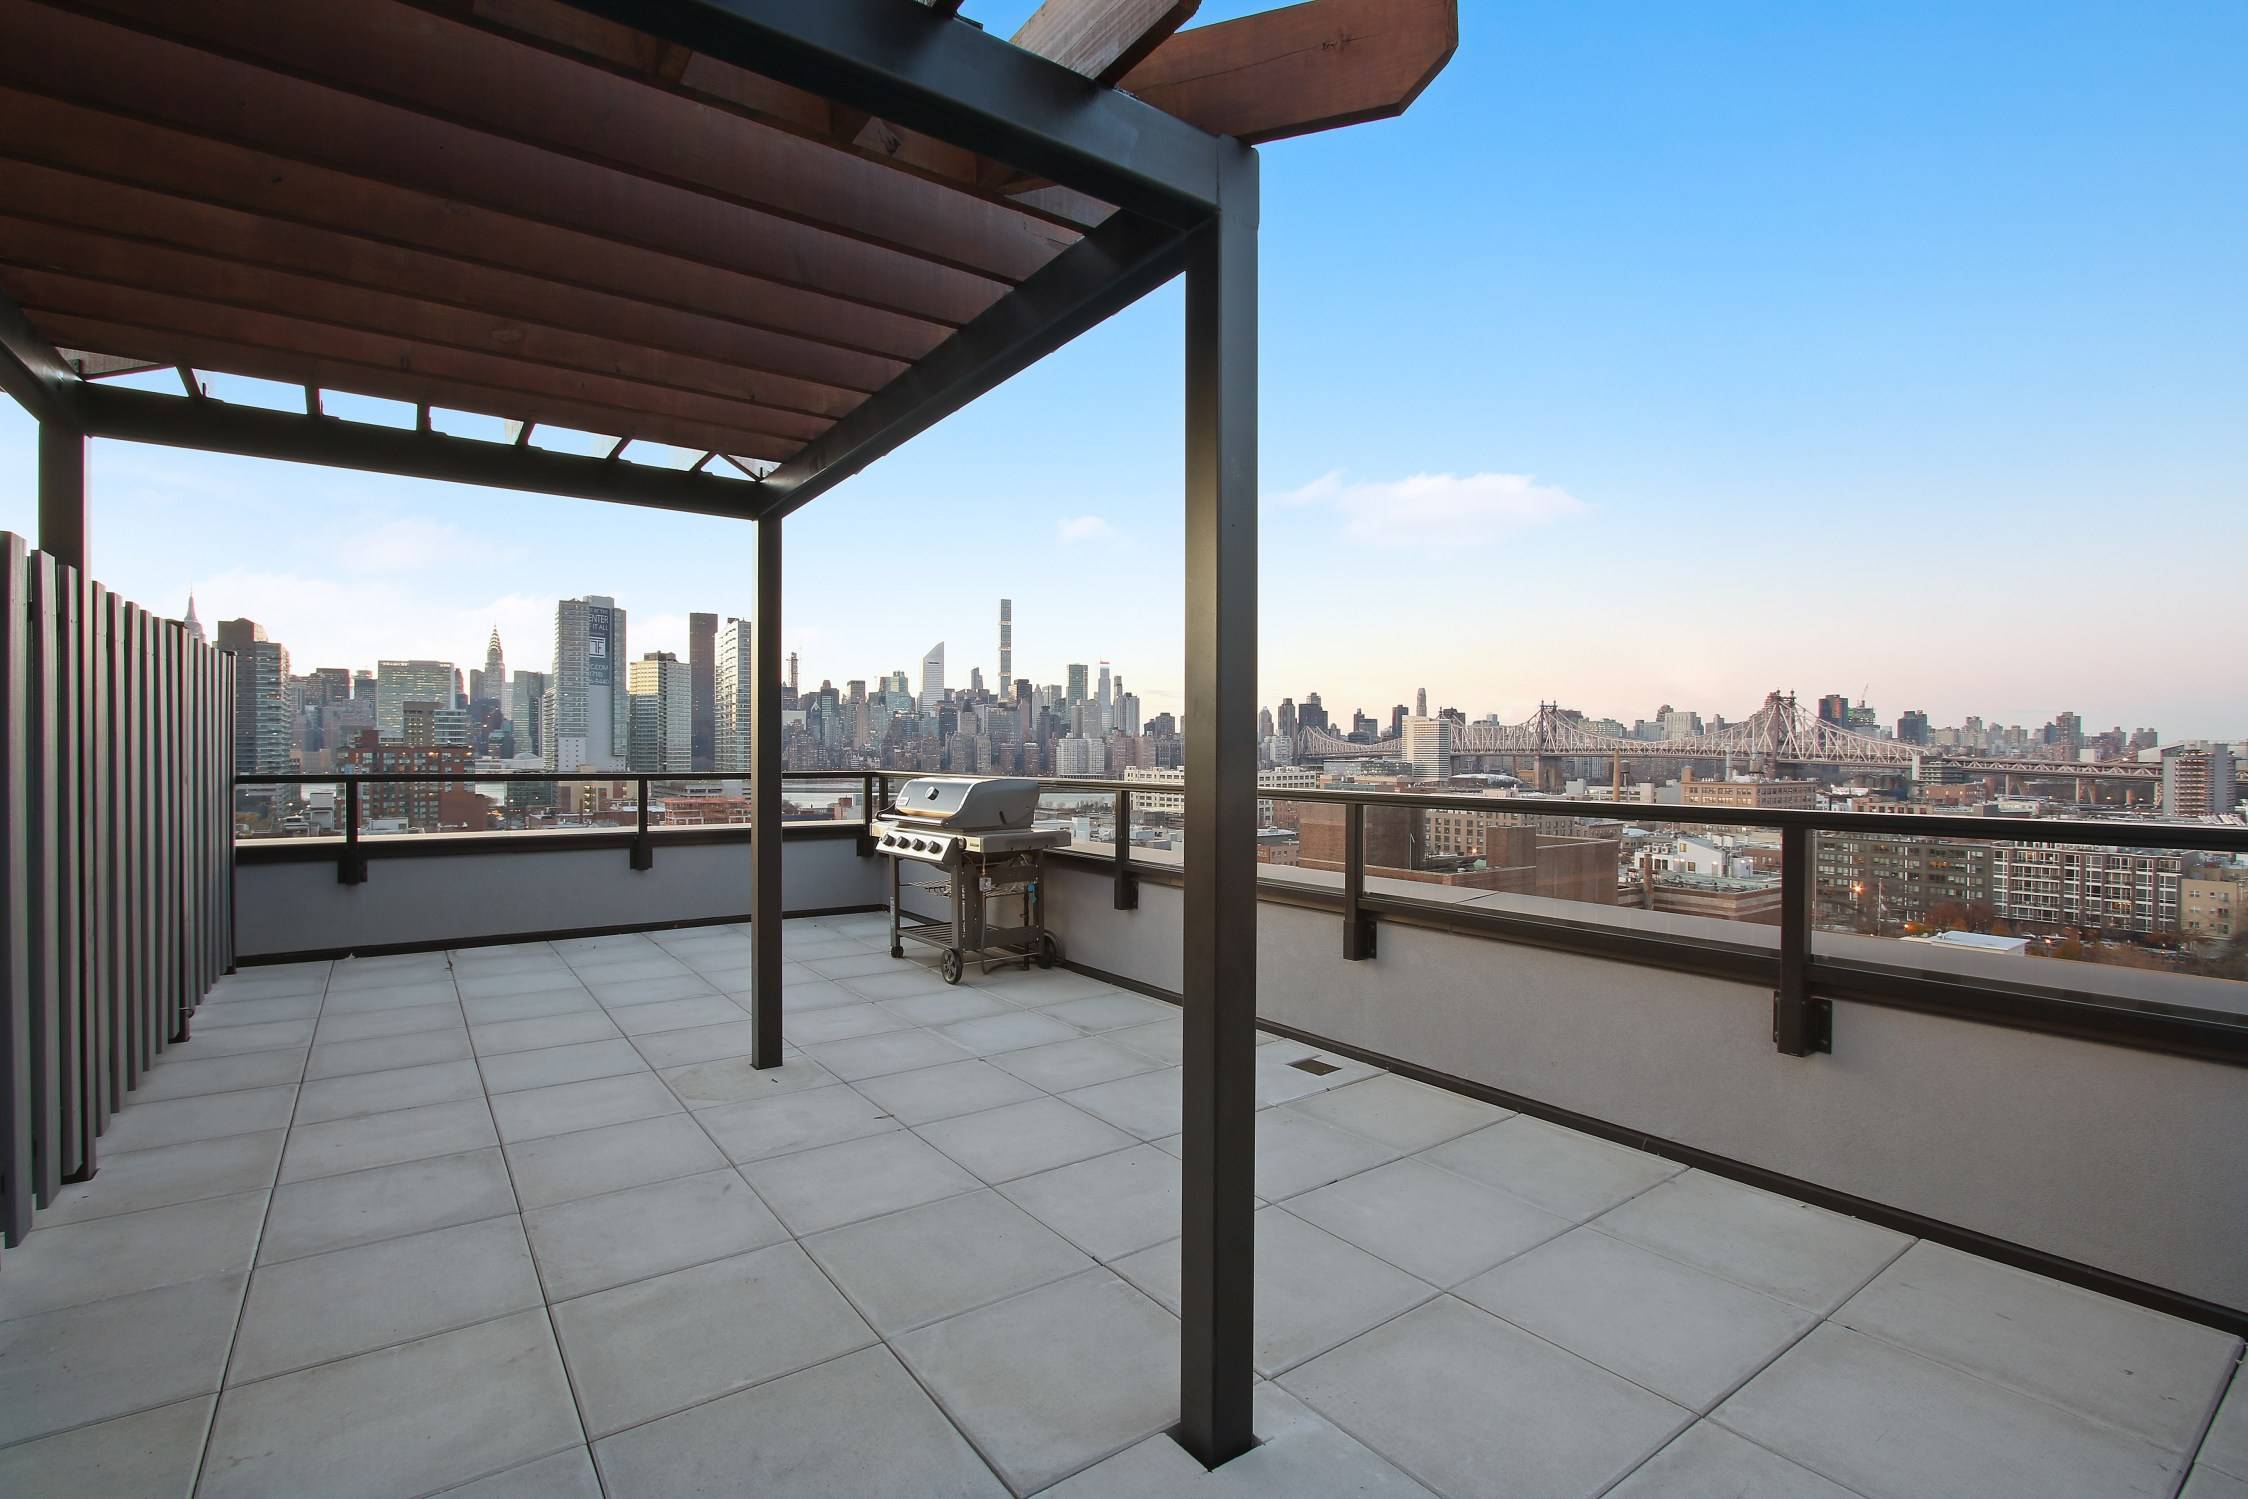 This SPECTACULAR three bedroom, two bathroom Condo with balcony has breathtaking SUNSET VIEWS of Manhattan.